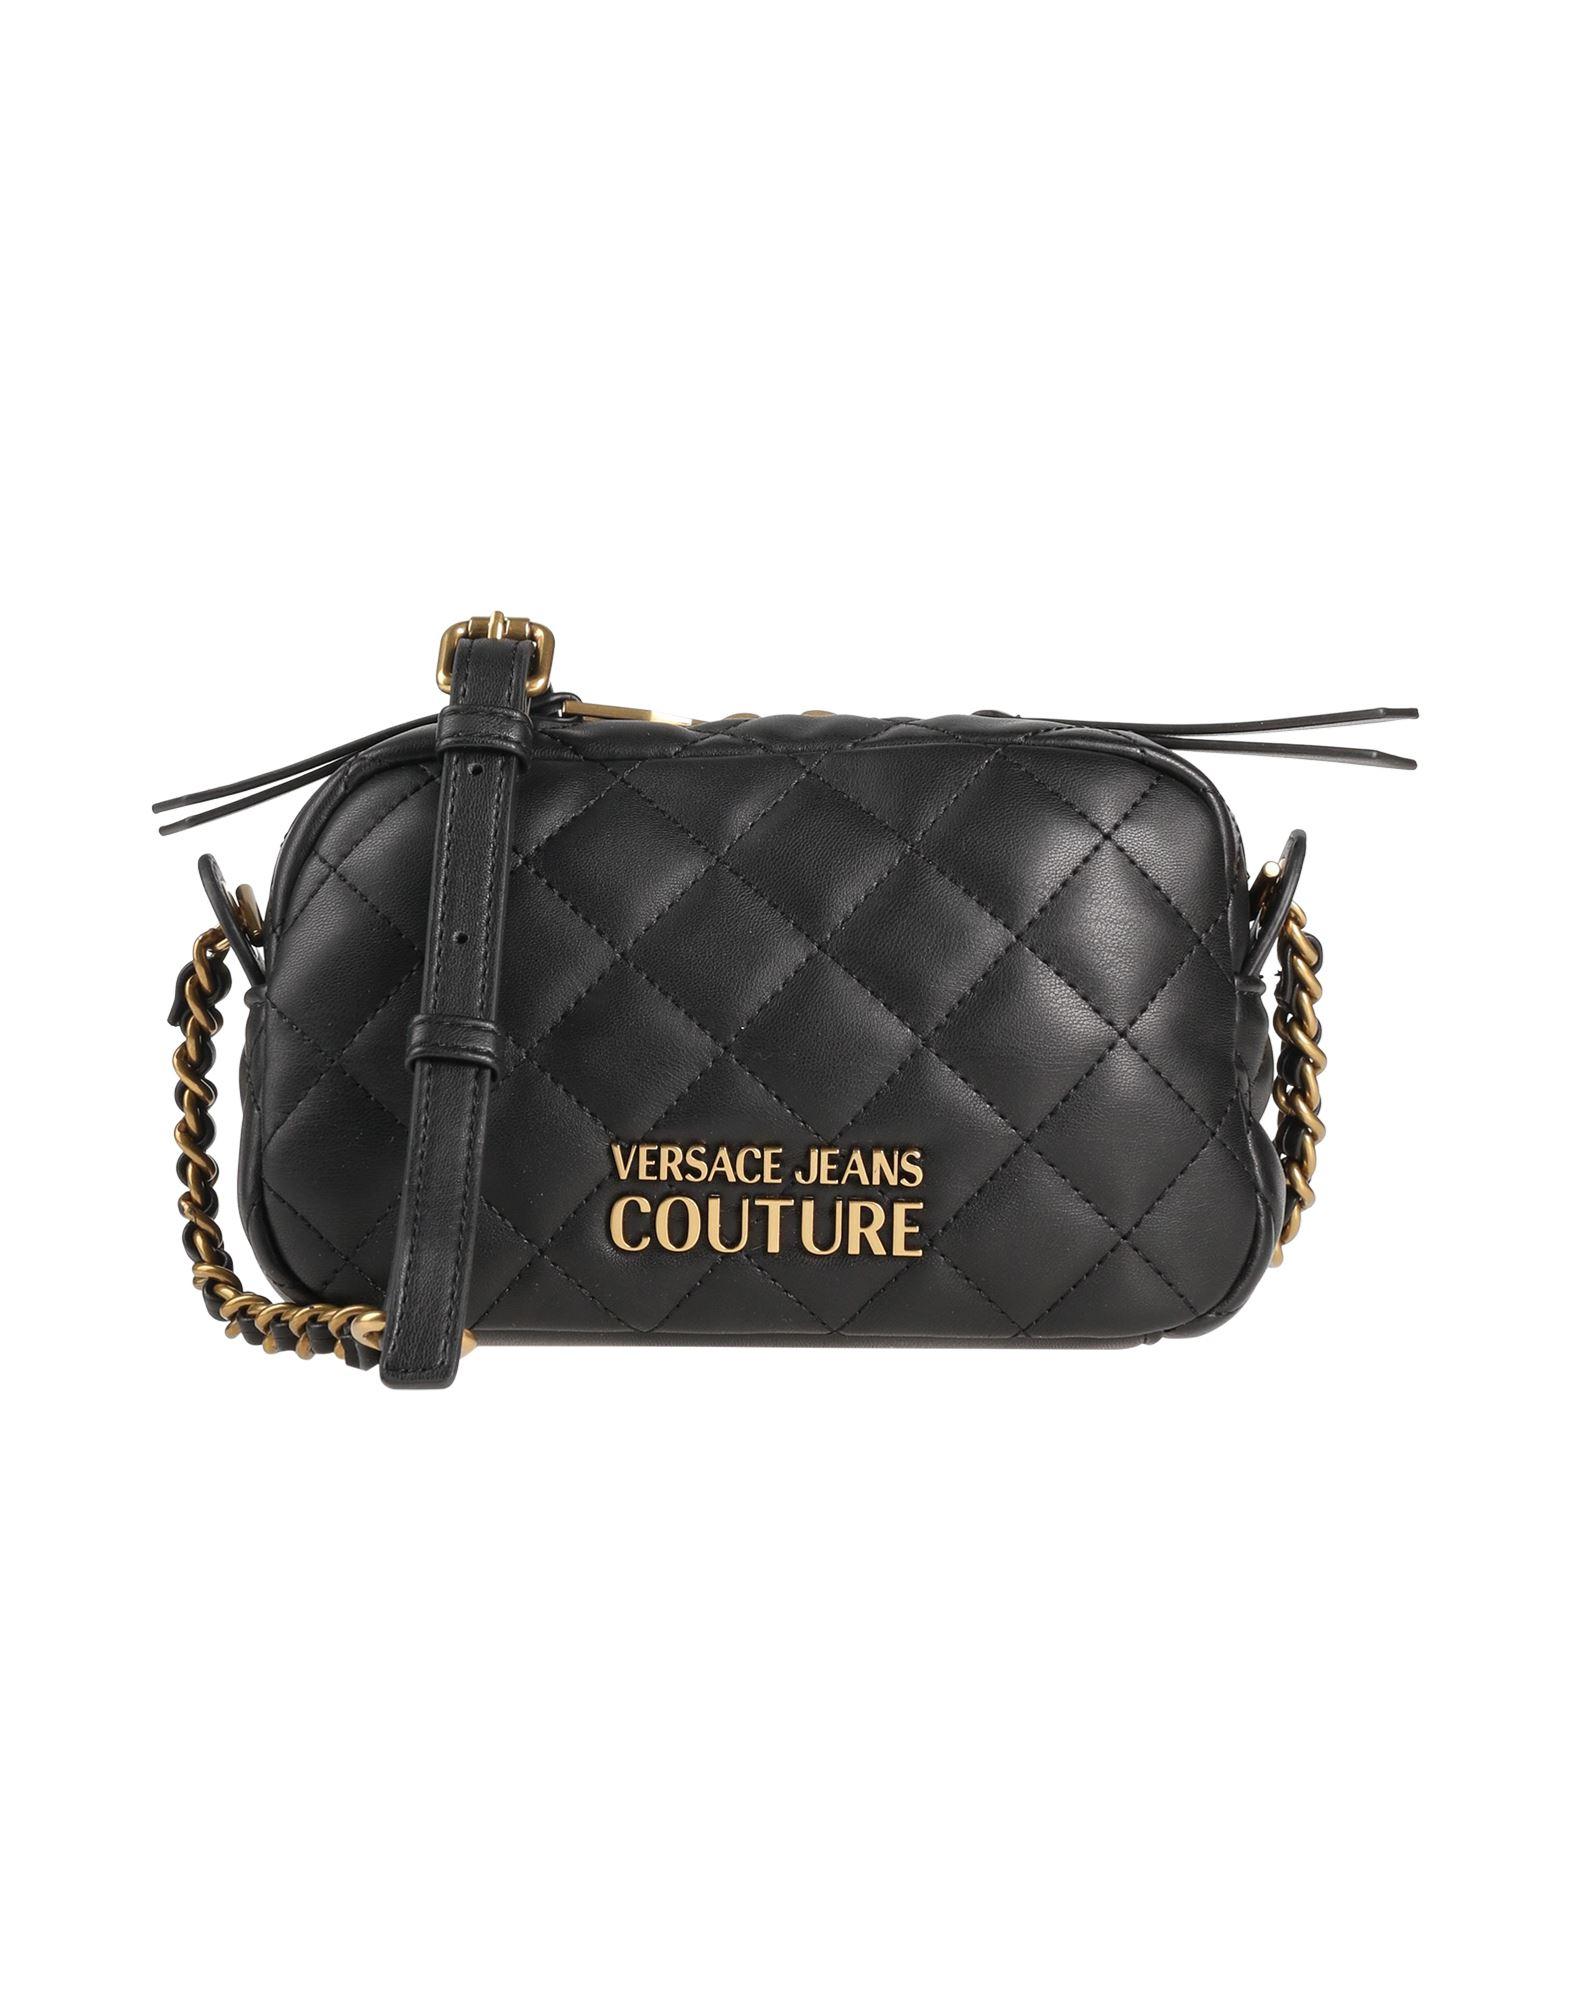 Versace Jeans Couture Cross-body Bag in Black | Lyst